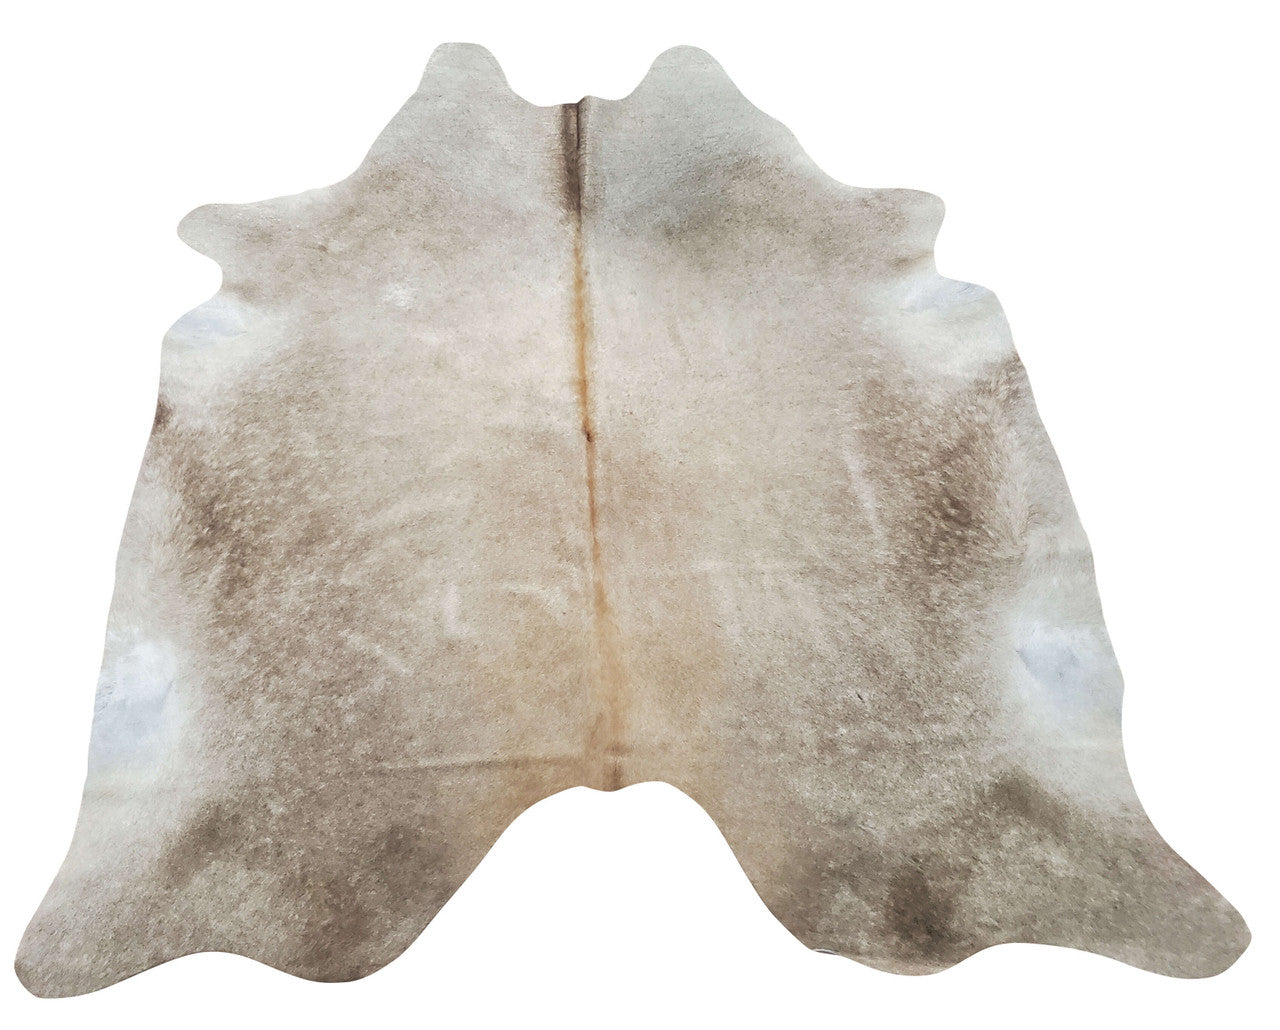 This light beige cowhide rug feels like your walking on clouds! It’s so soft and so beautiful, one of a kind plus free shipping all over Canada and the USA